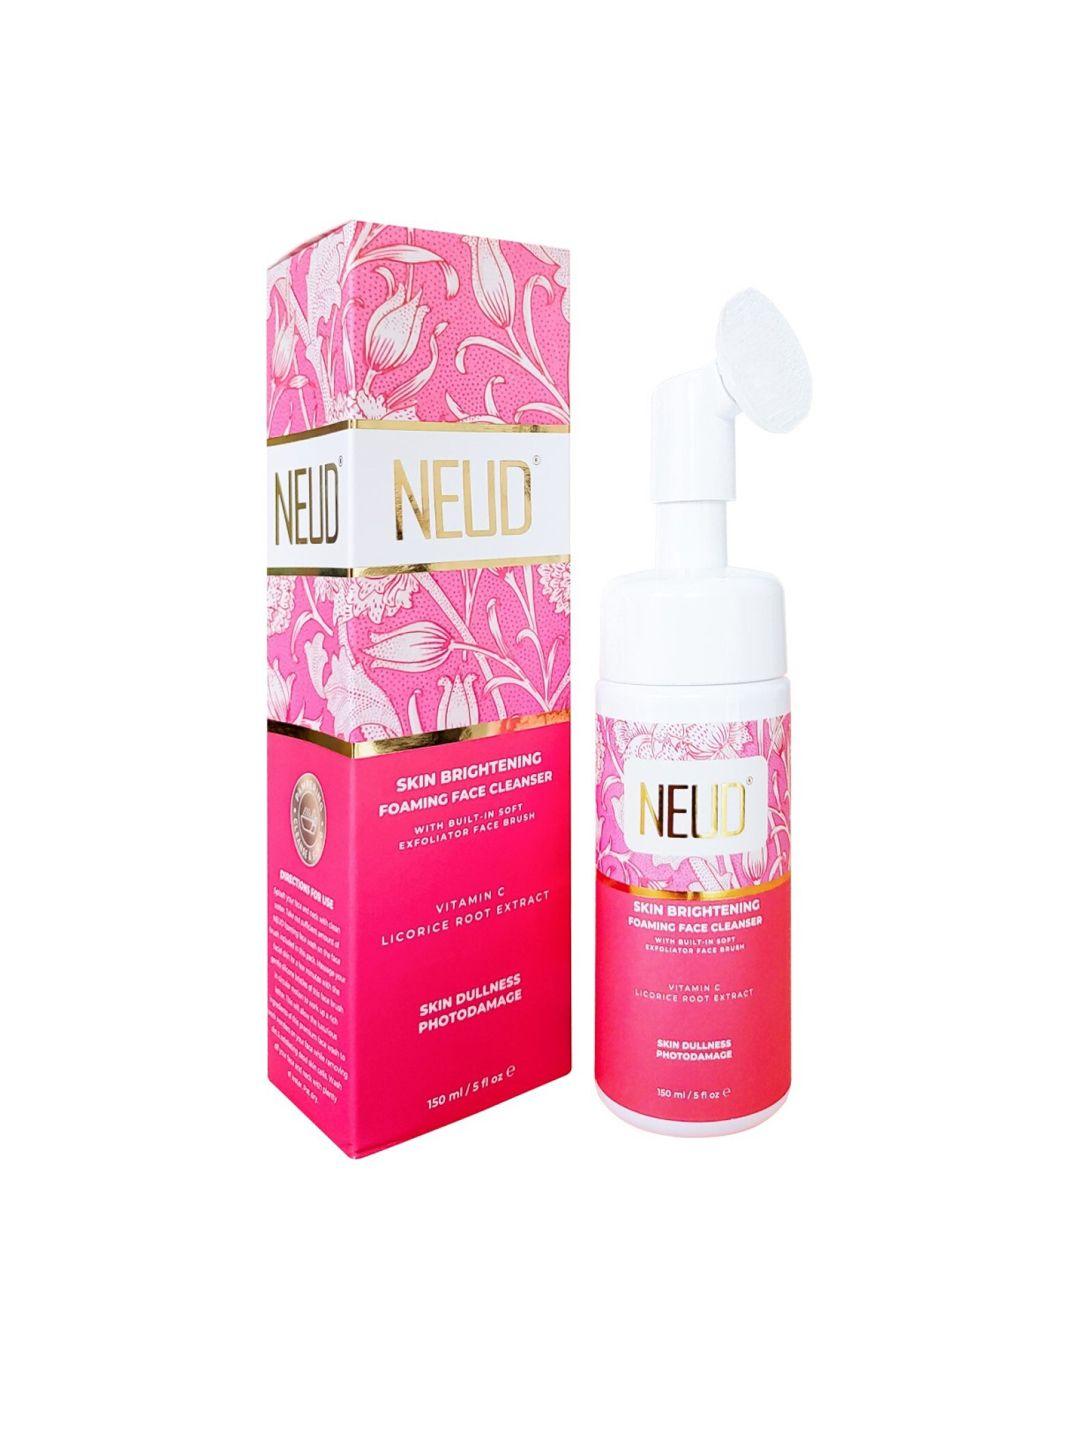 neud skin brightening foaming face cleanser with vitamin c & licorice root extract 150 ml